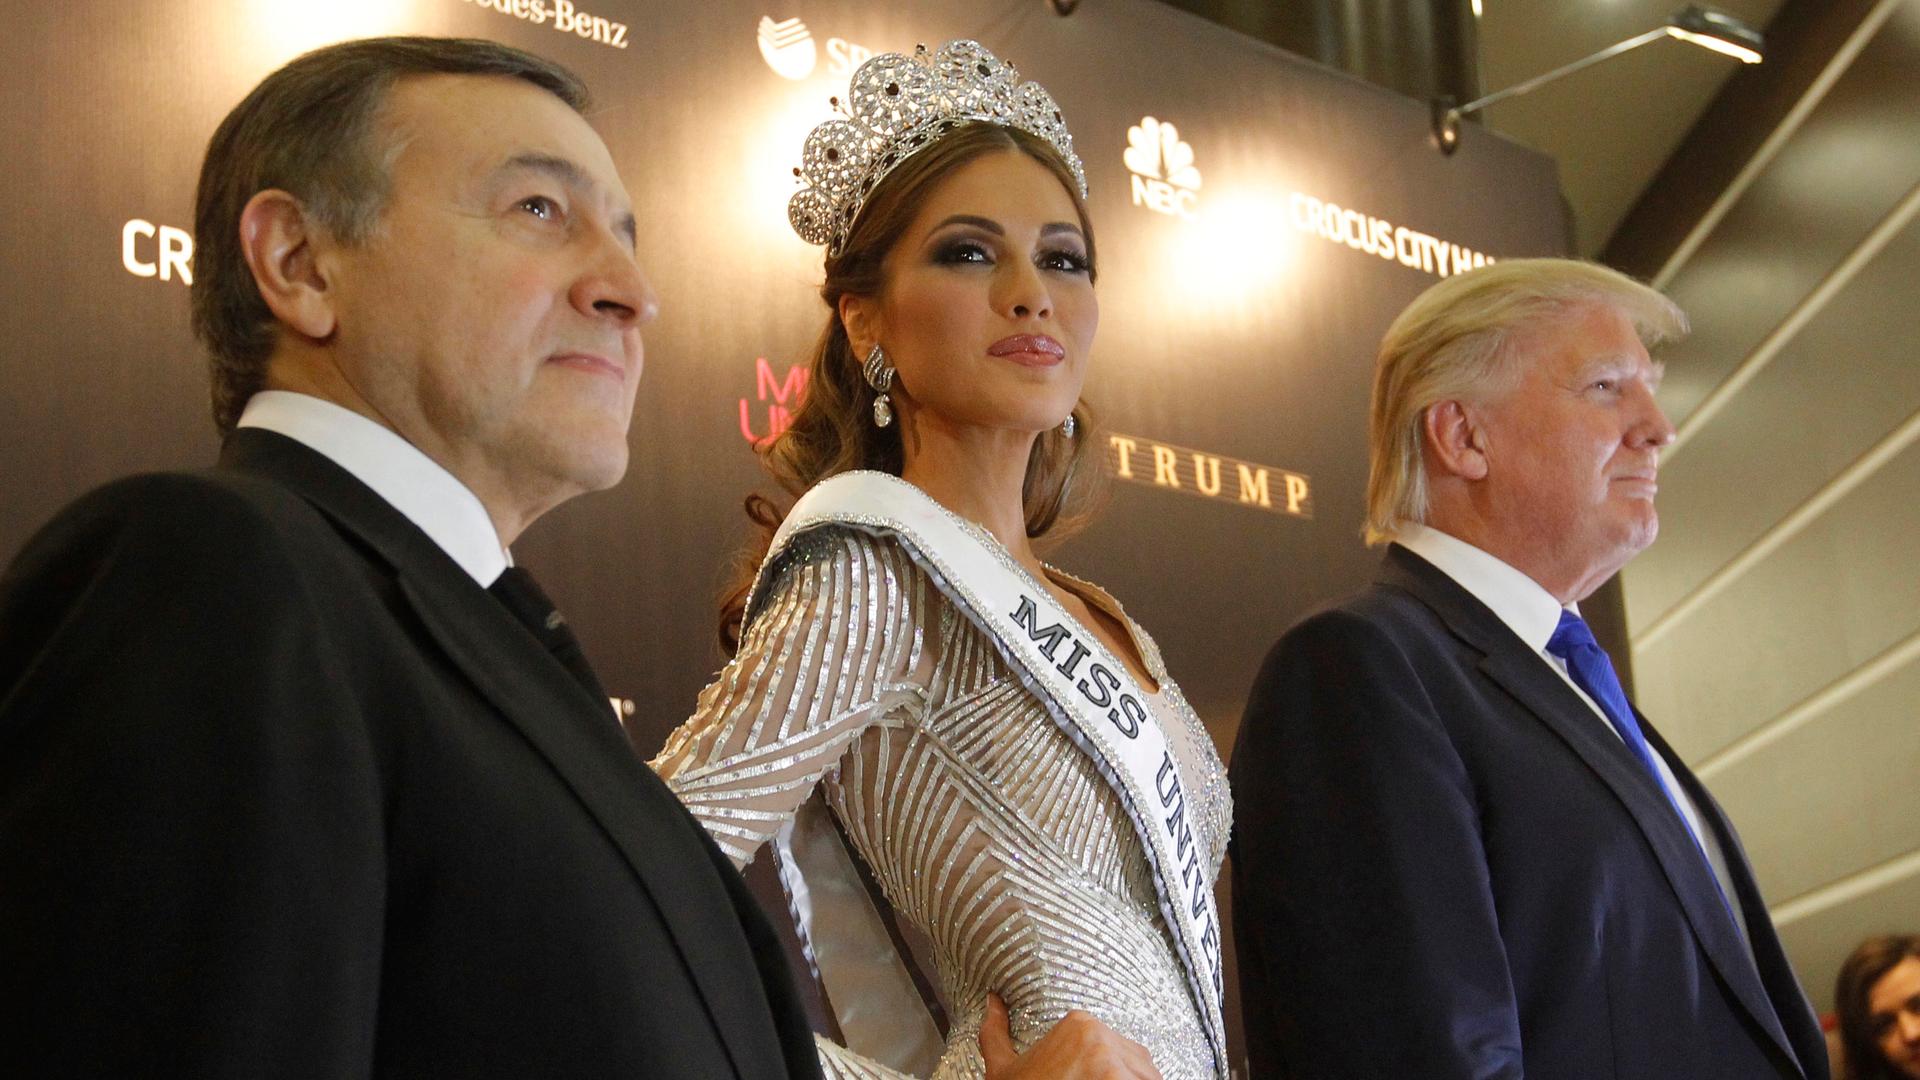 Miss Universe 2013 Gabriela Isler stands between Donald Trump, co-owner of the Miss Universe Organization, and Russian oligarch Aras Agalarov, during a news conference following the Miss Universe pageant at Crocus City Hall in Moscow on November 9, 2013.